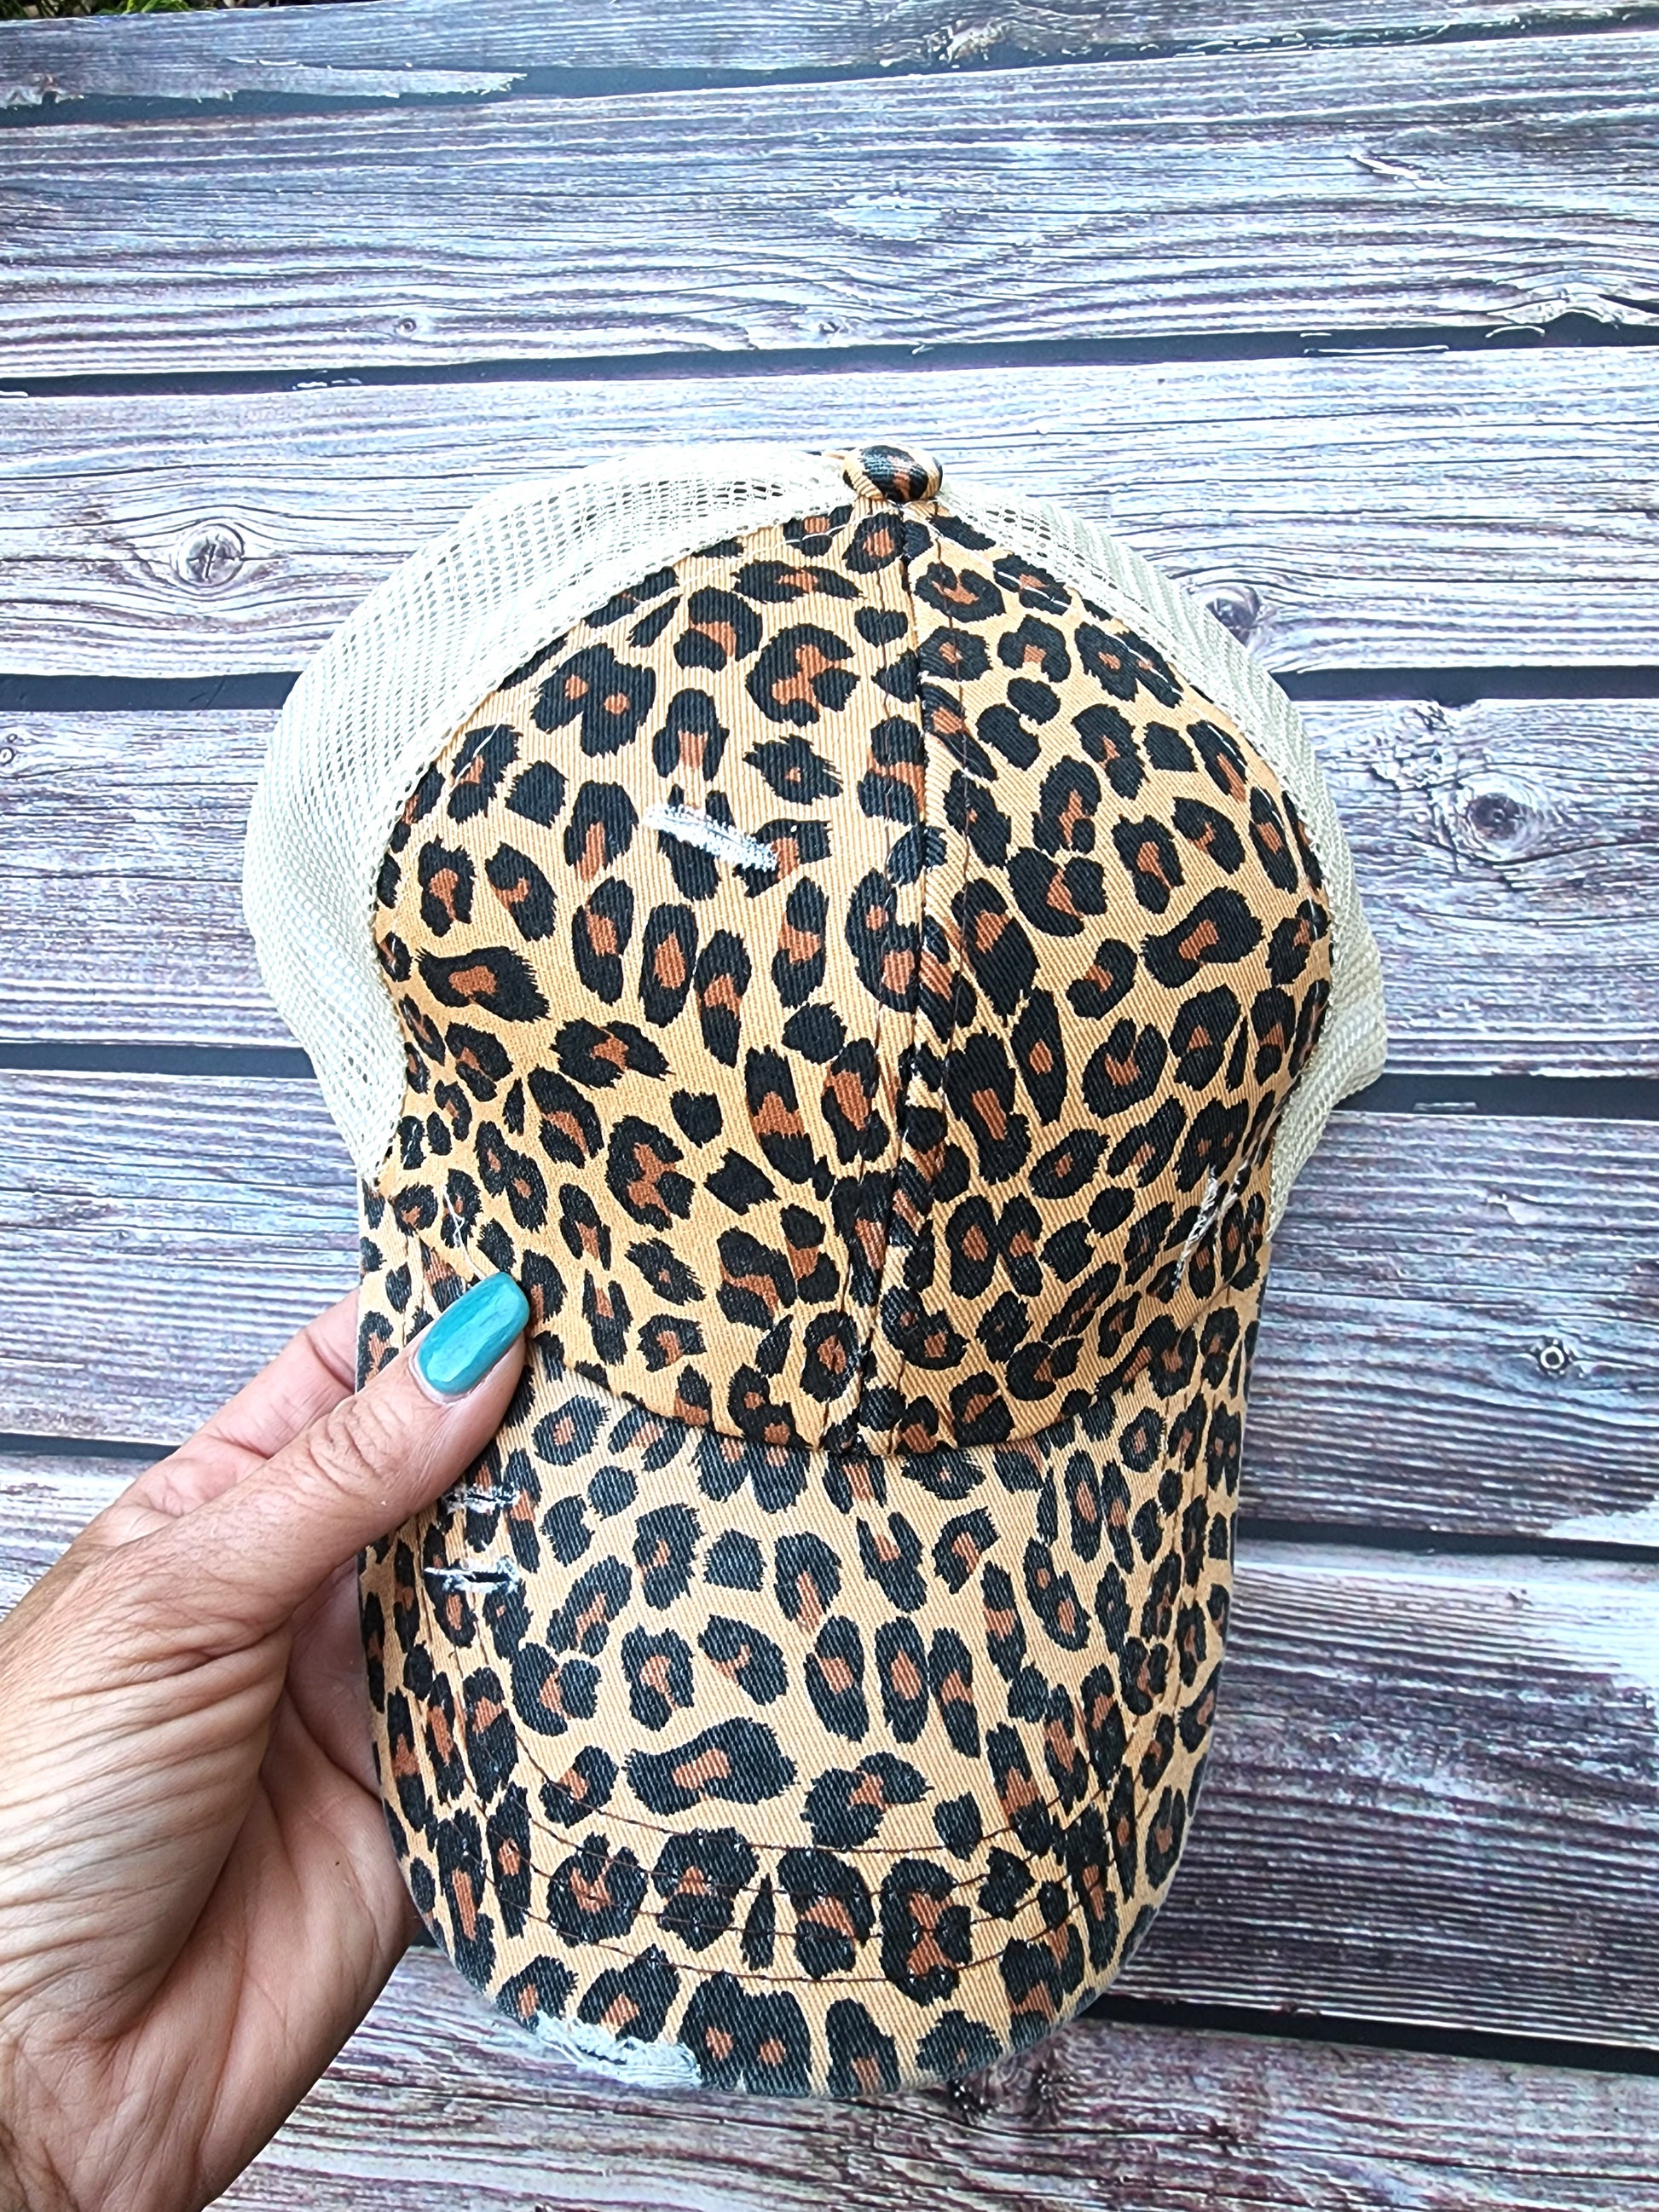 Structured Distressed Ponytail Criss Cross Back Baseball Trucker Hat Cap Rusty Tiger